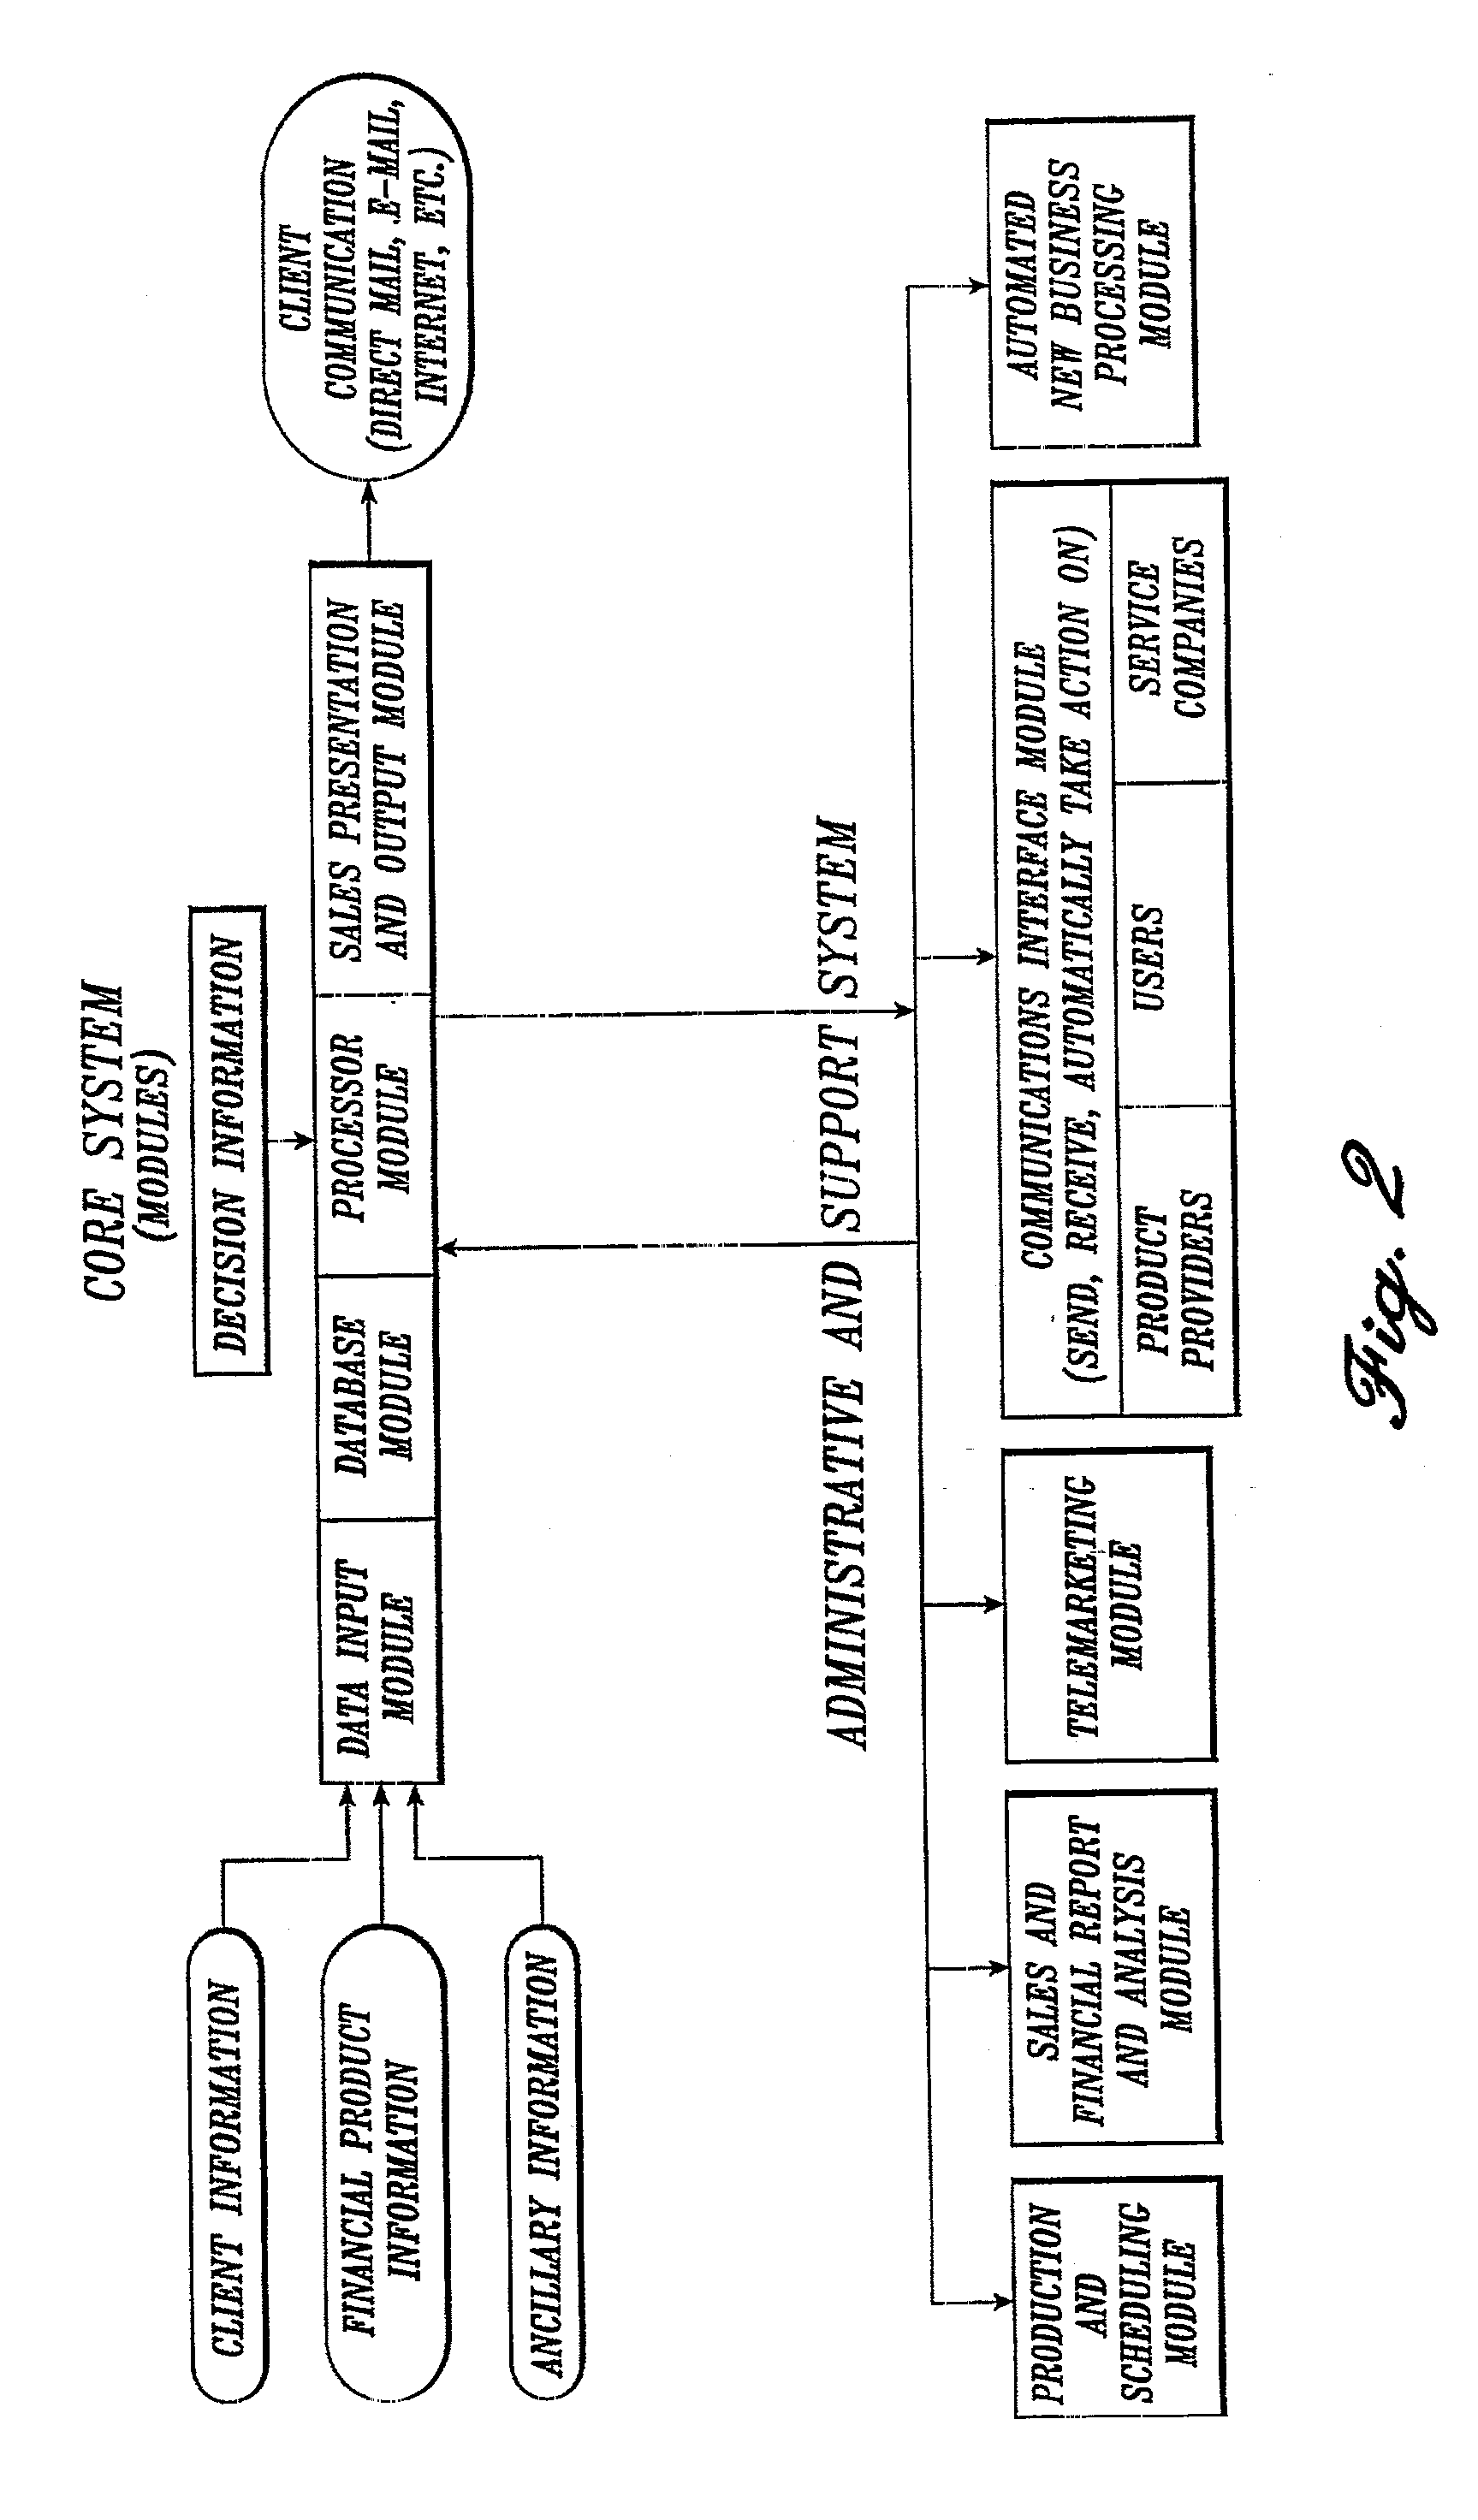 Customized communication document creation system and method